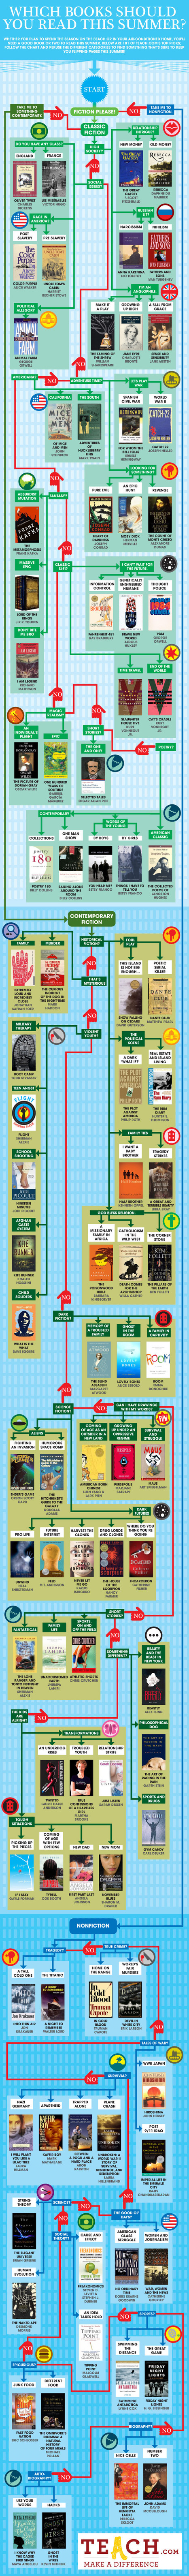 Summer Reading Flowchart: What Should You Read On Your Break? | 21st Century Learning and Teaching | Scoop.it